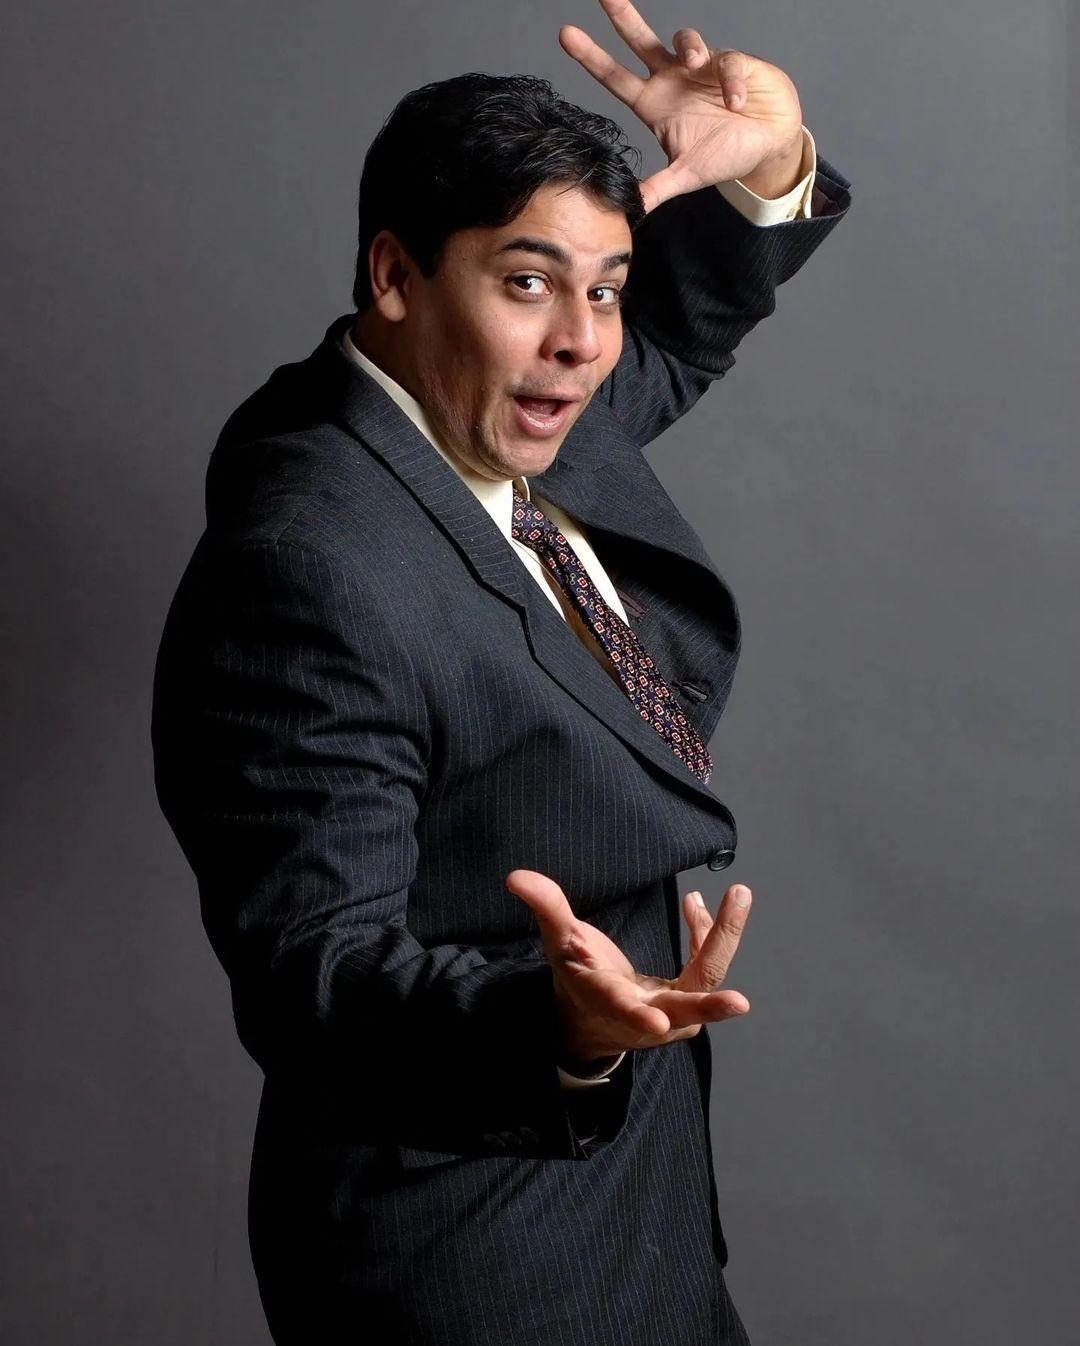 Cyrus Broacha becomes the 4th contestant to enter the house. He makes an entry on stage dressed as a woman, and also dances with Salman Khan on a song from his film Kisi Ka Bhai Kisi Ki Jaan. He is a TV anchor, comedian, political satirist, columnist, podcaster and author. He is also a prankster, best known for his show Bakra on MTV and his show The Week That Wasn't.